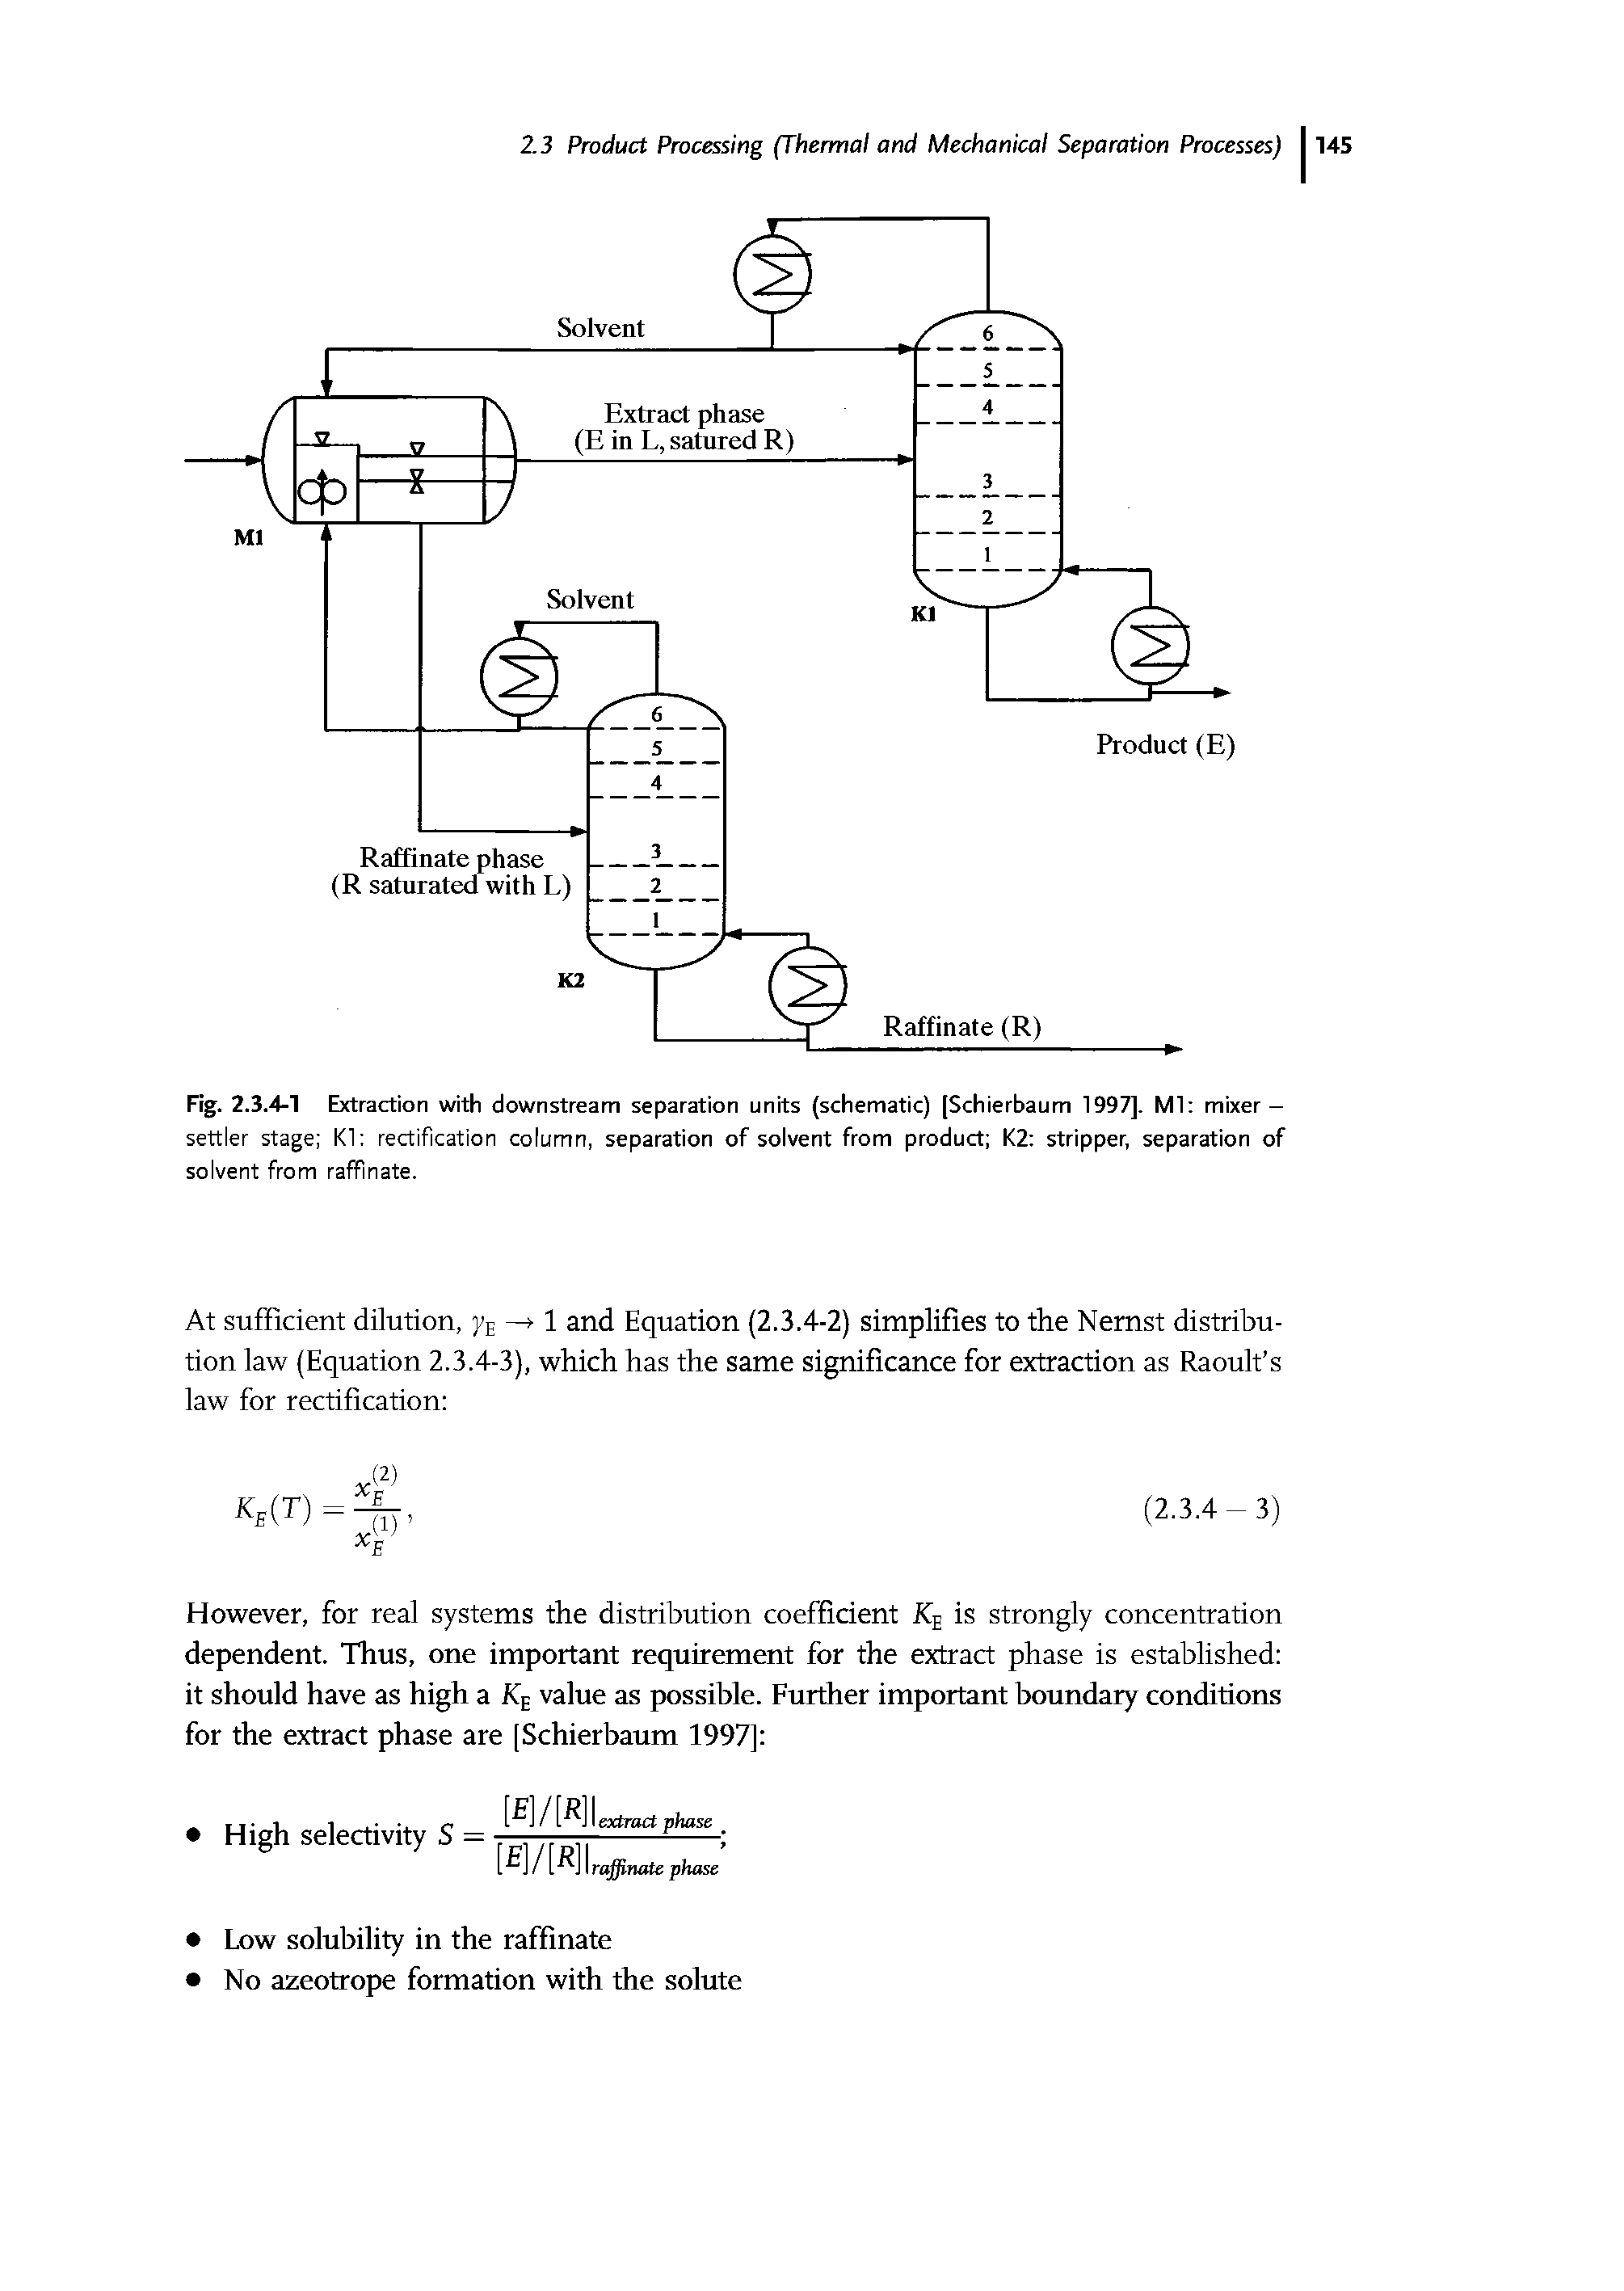 Fig. 2.3.4-1 Extraction with downstream separation units (schematic) (Schierbaum 1997]. Ml mixer-settler stage Kl rectification column, separation of solvent from product K2 stripper, separation of solvent from raffinate.